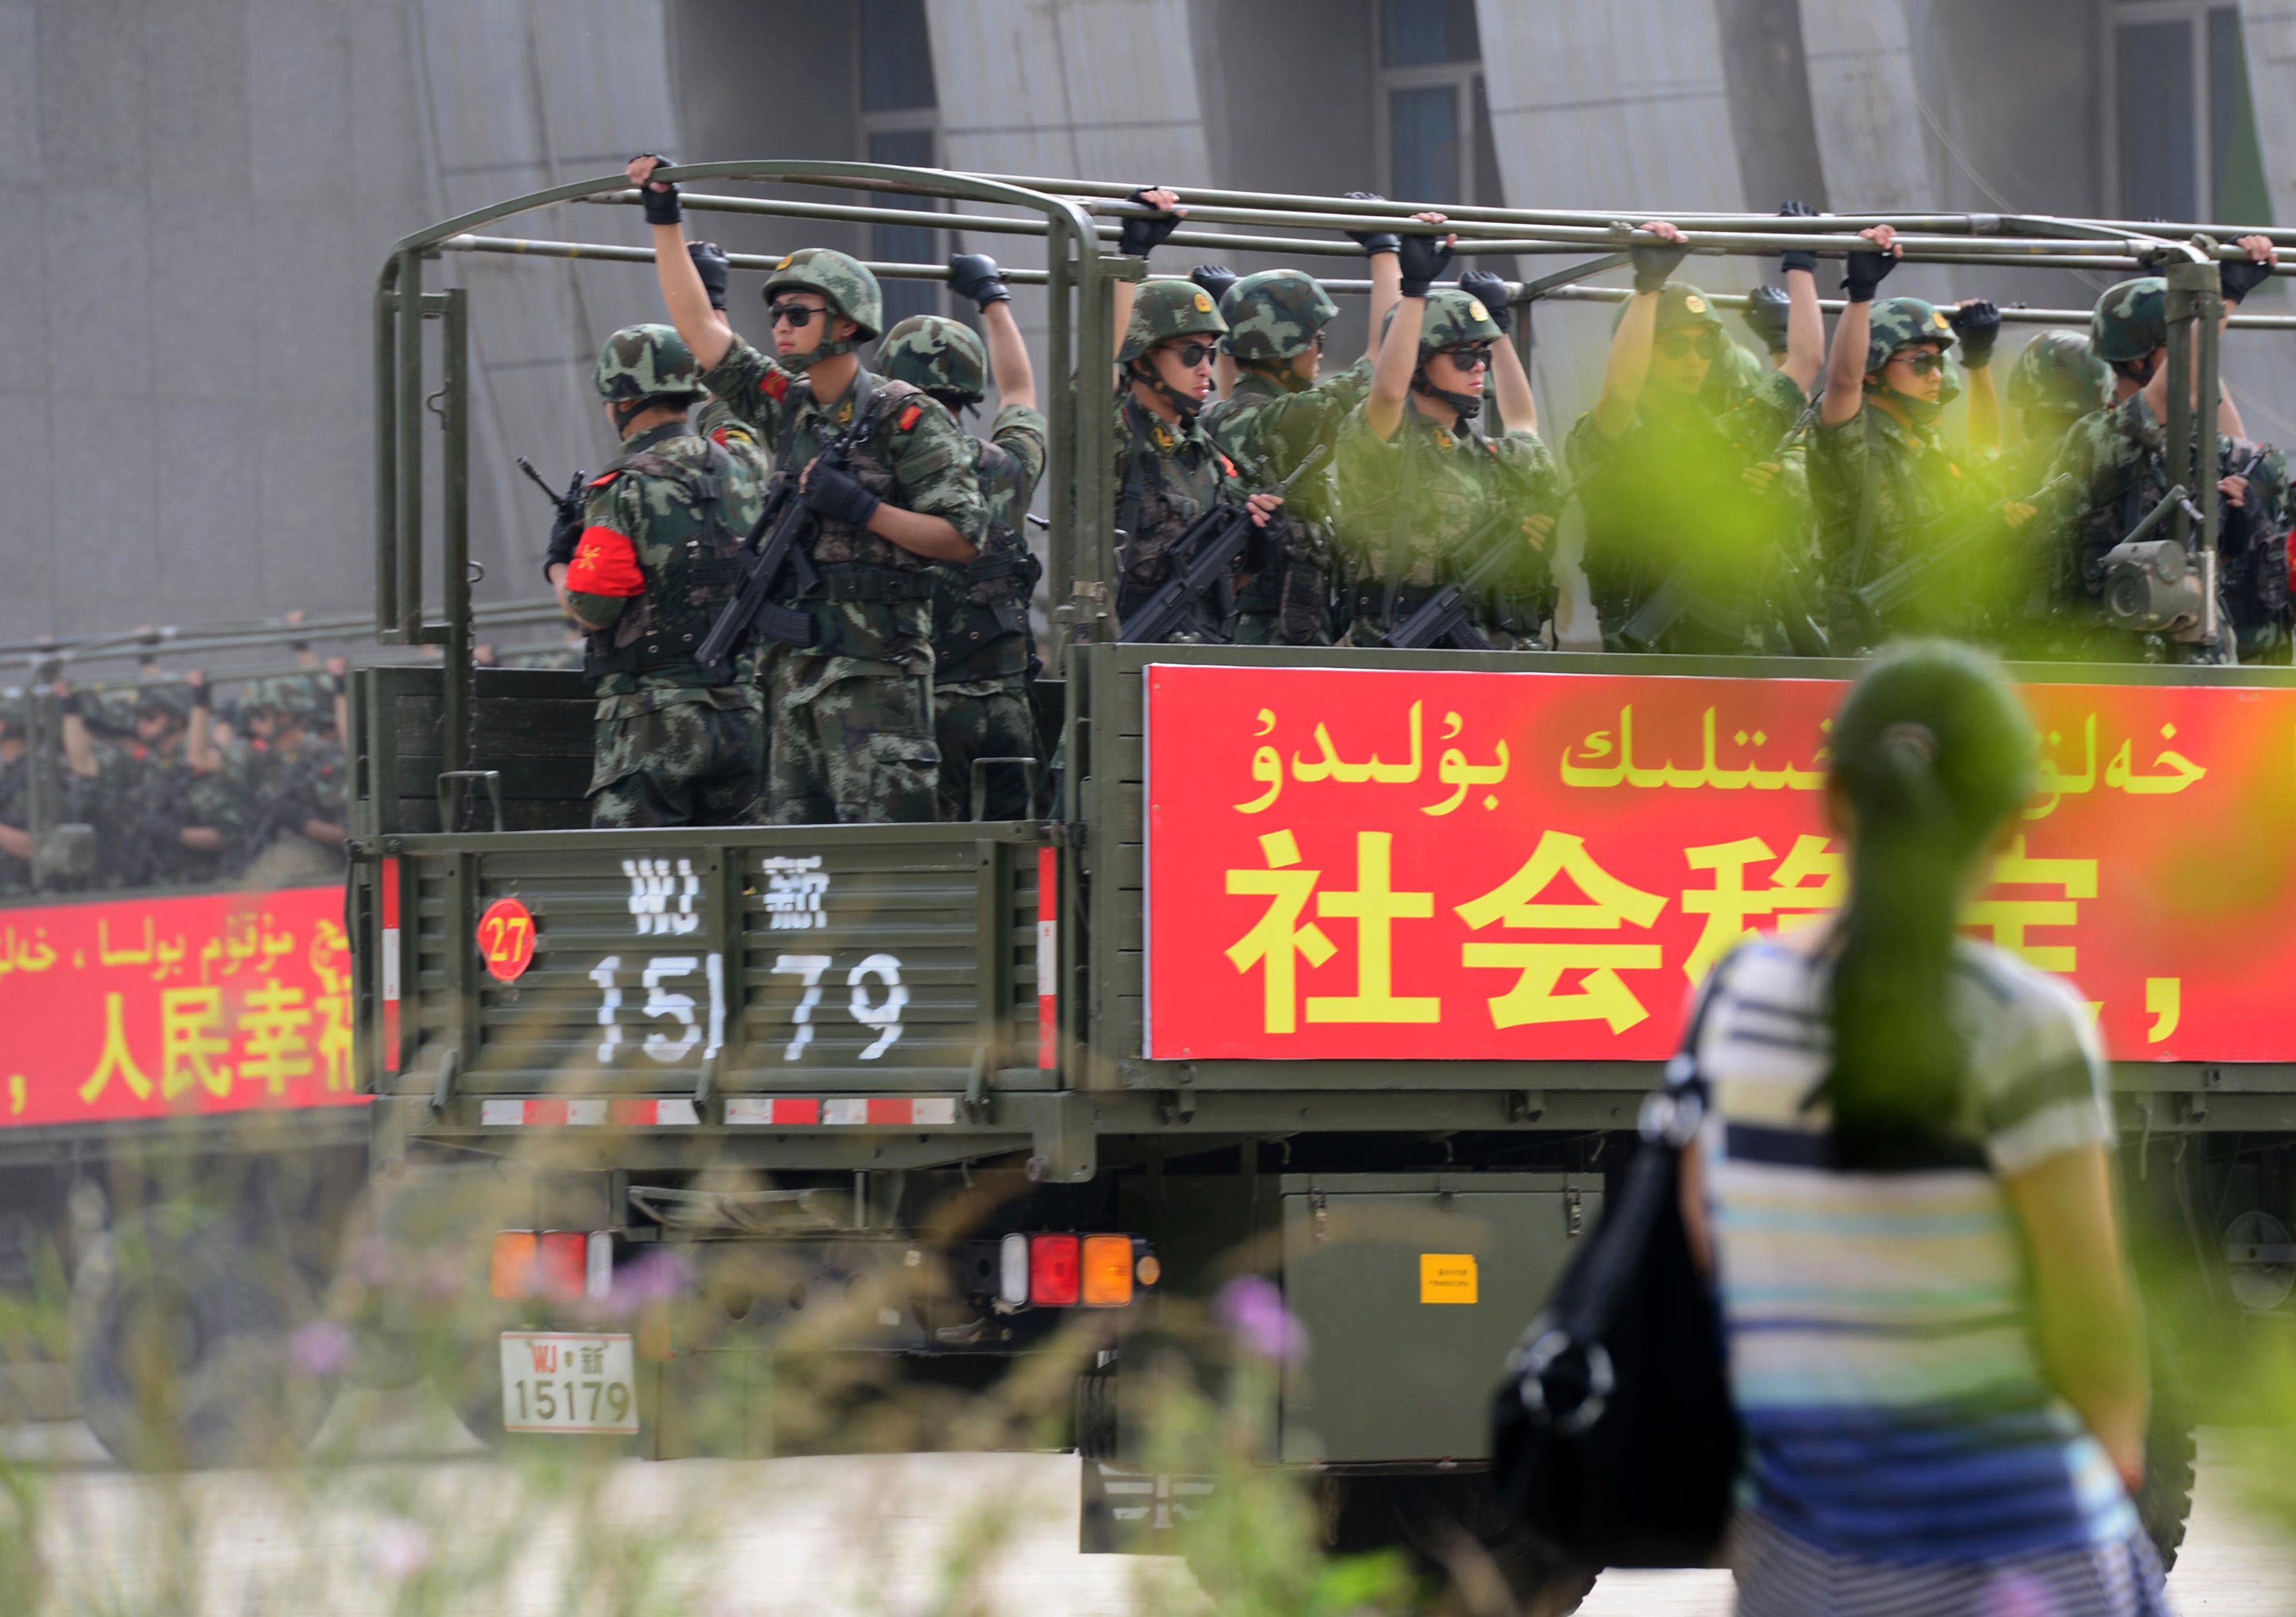 Security has been increased in China's Xinjiang region in the past year following a spate of deadly attacks. Photo: AFP